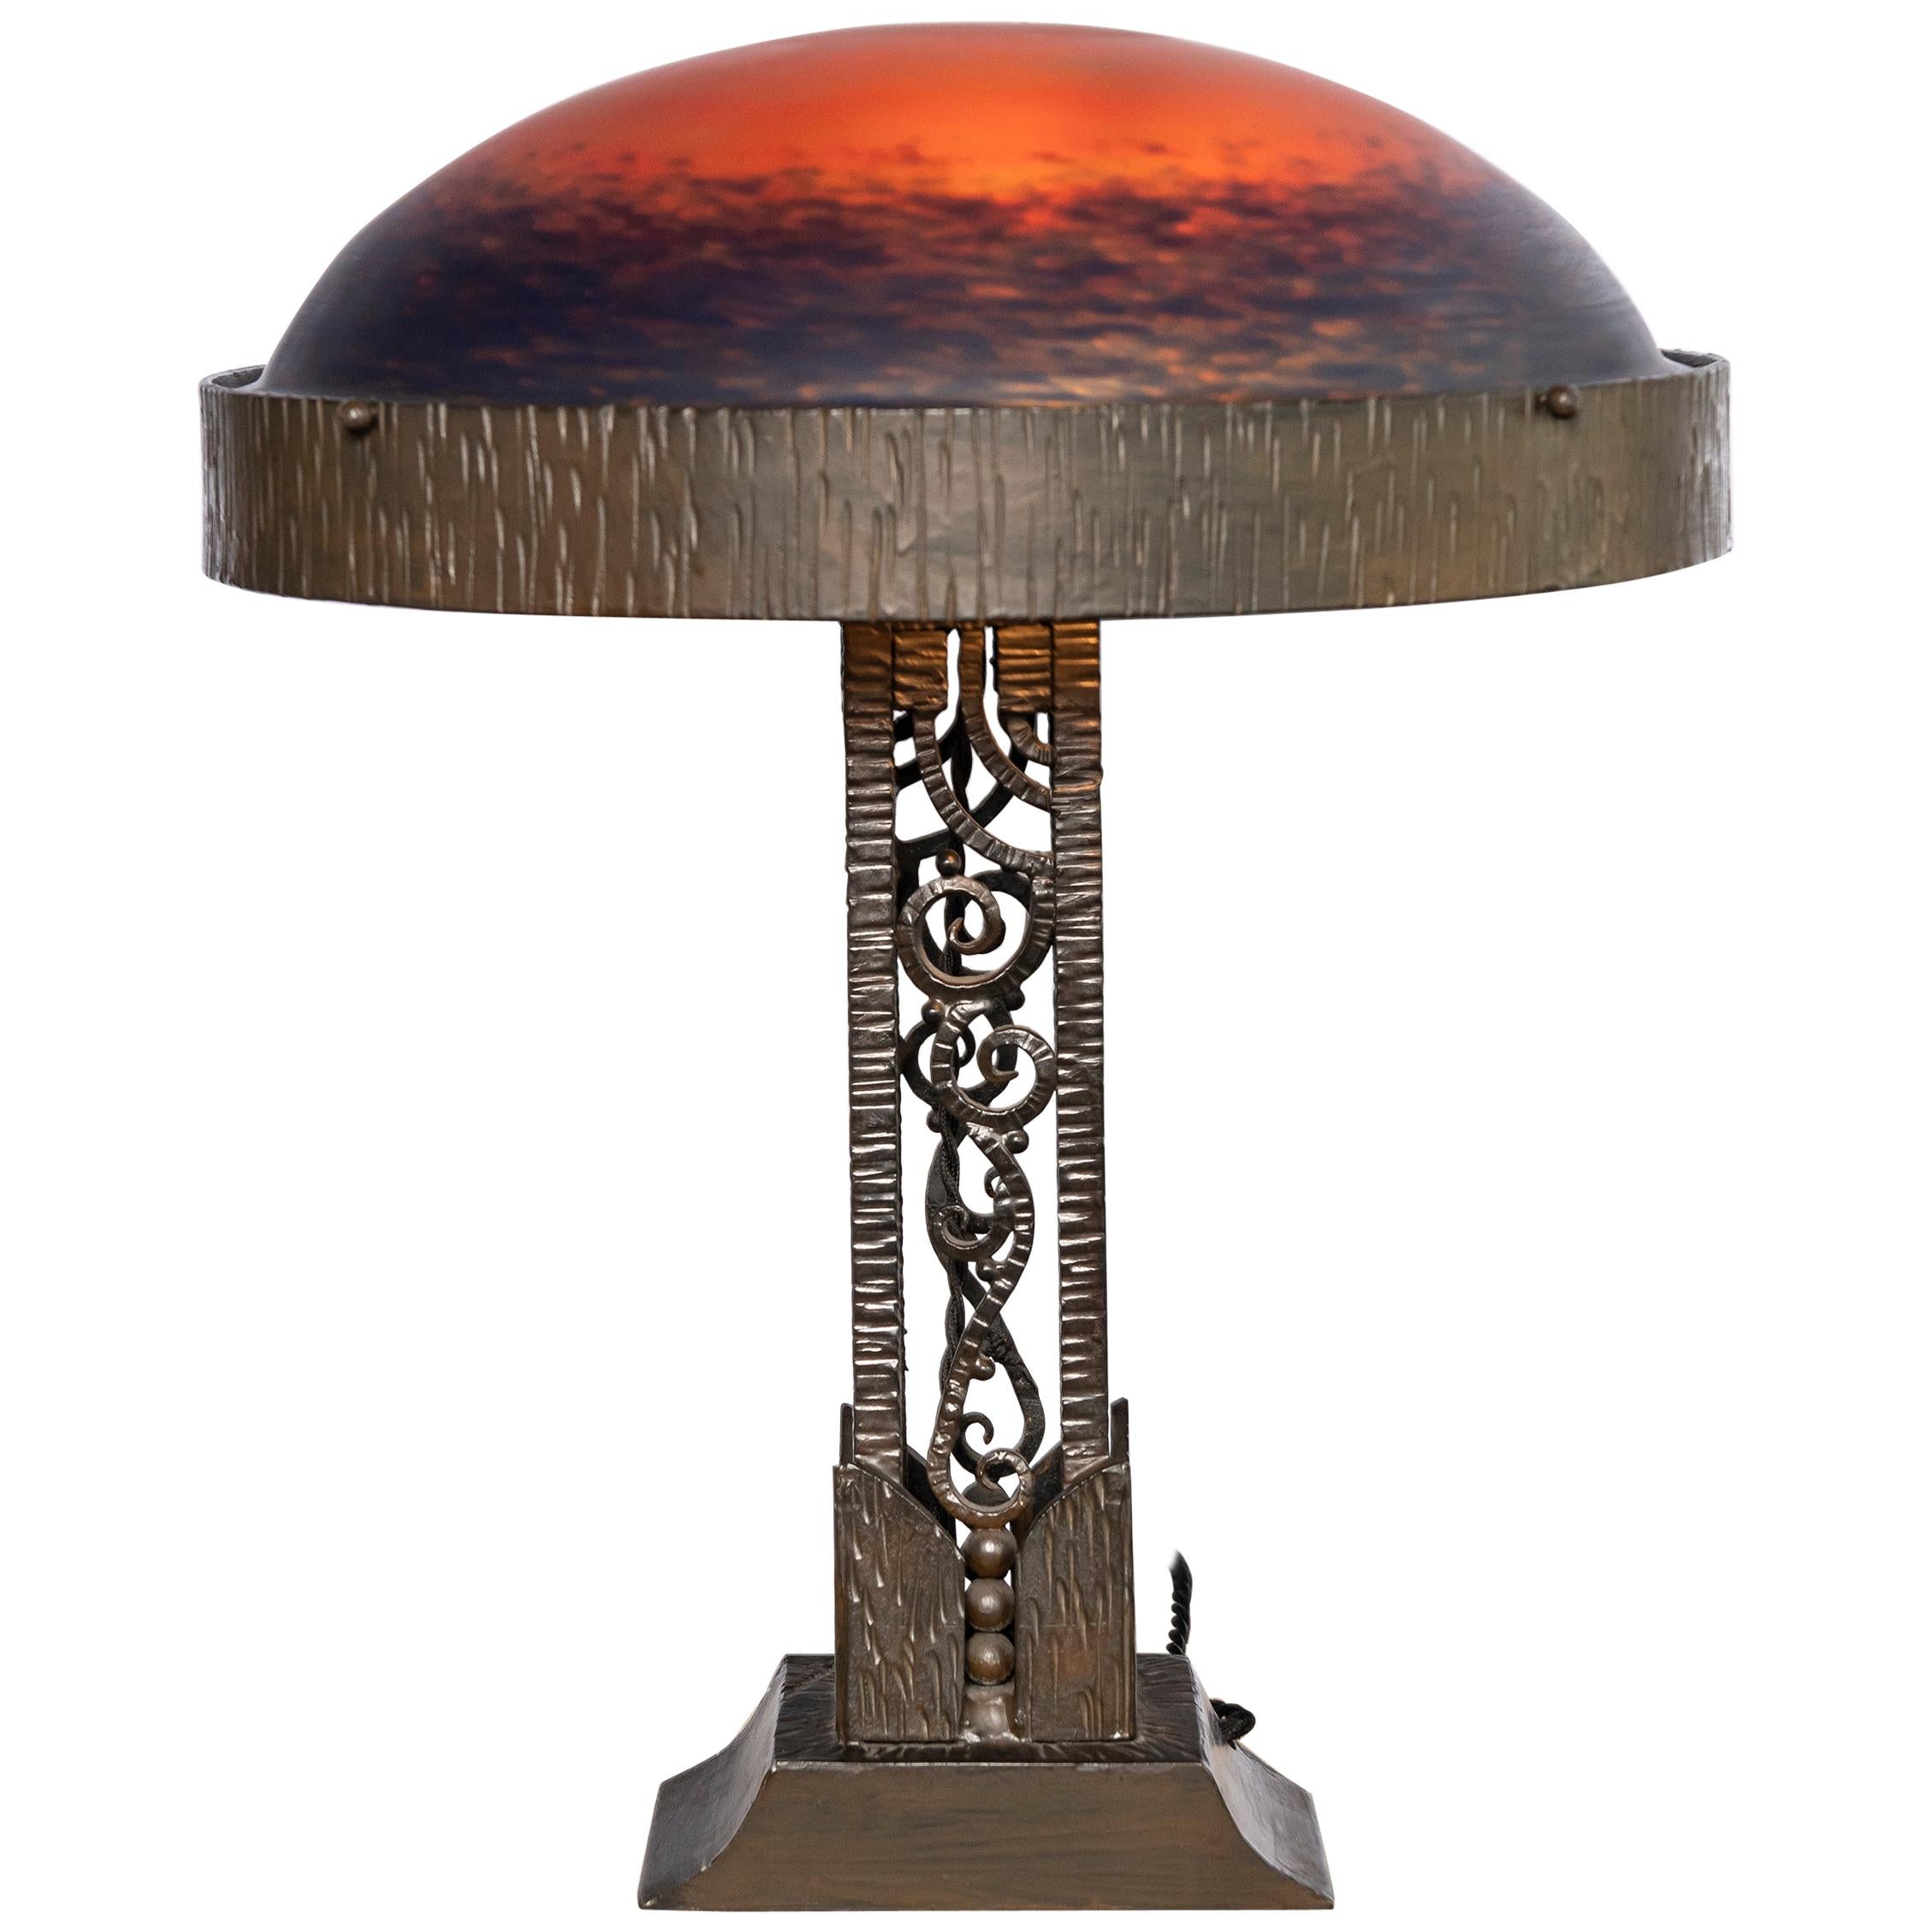 Wrought Iron and Daum Nancy Glass Table Lamp, France, circa 1920-1930 For Sale